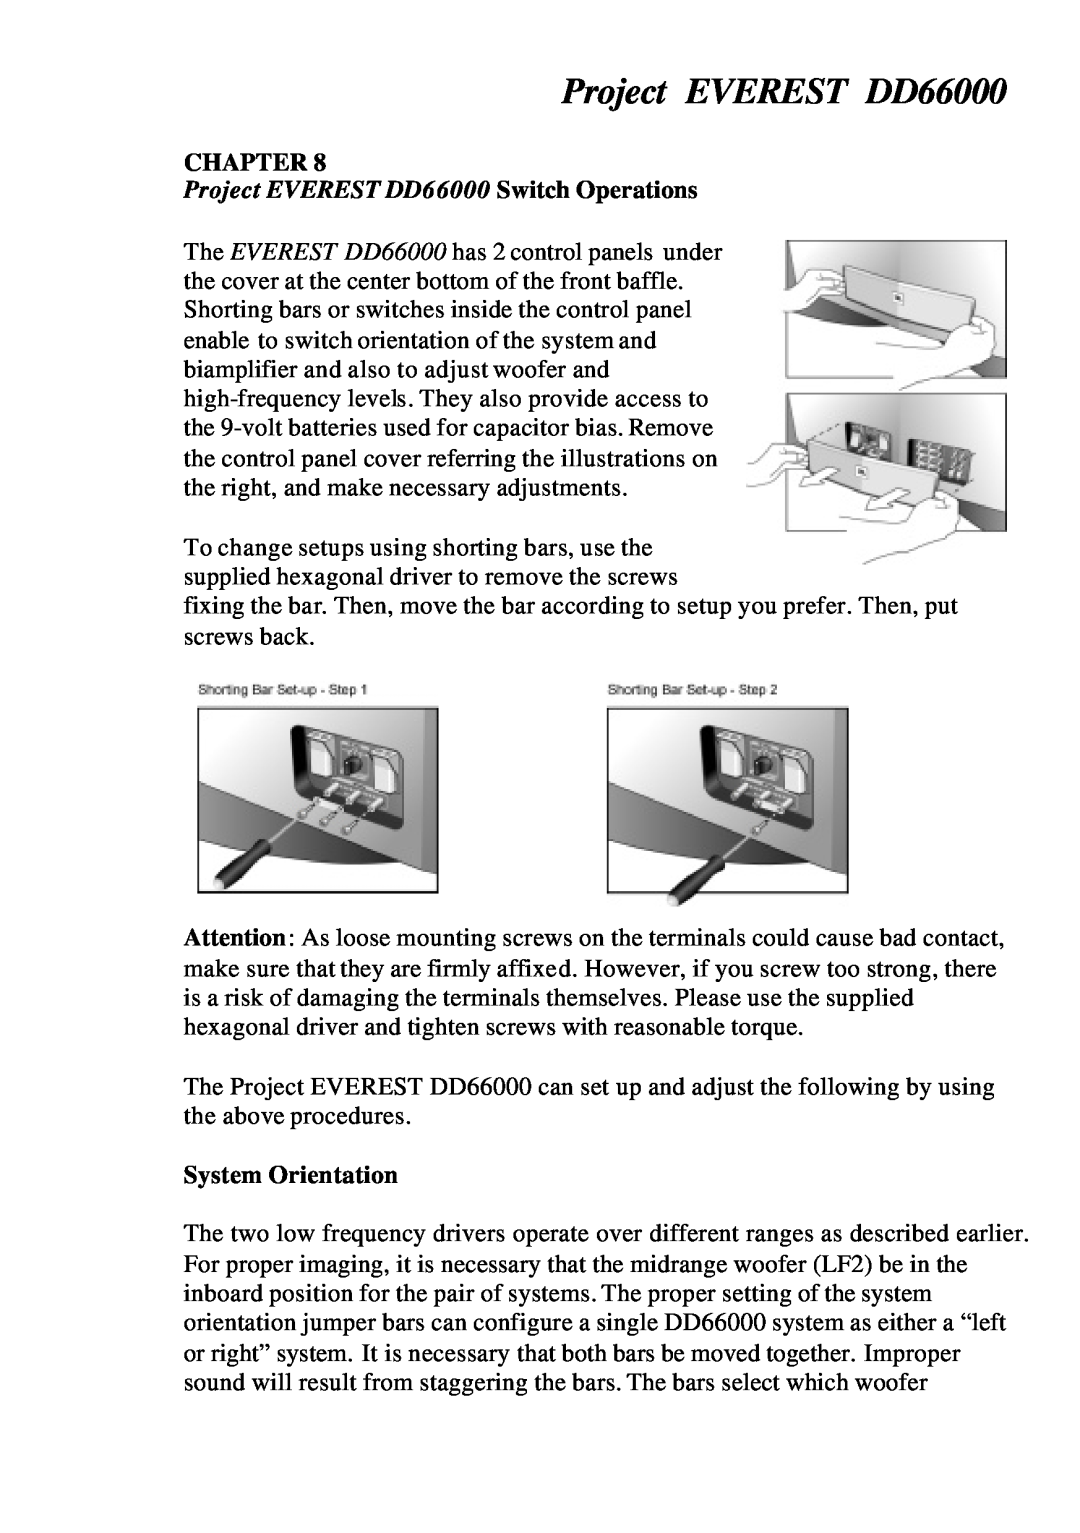 JBL manual Chapter, Project EVEREST DD66000 Switch Operations, System Orientation 